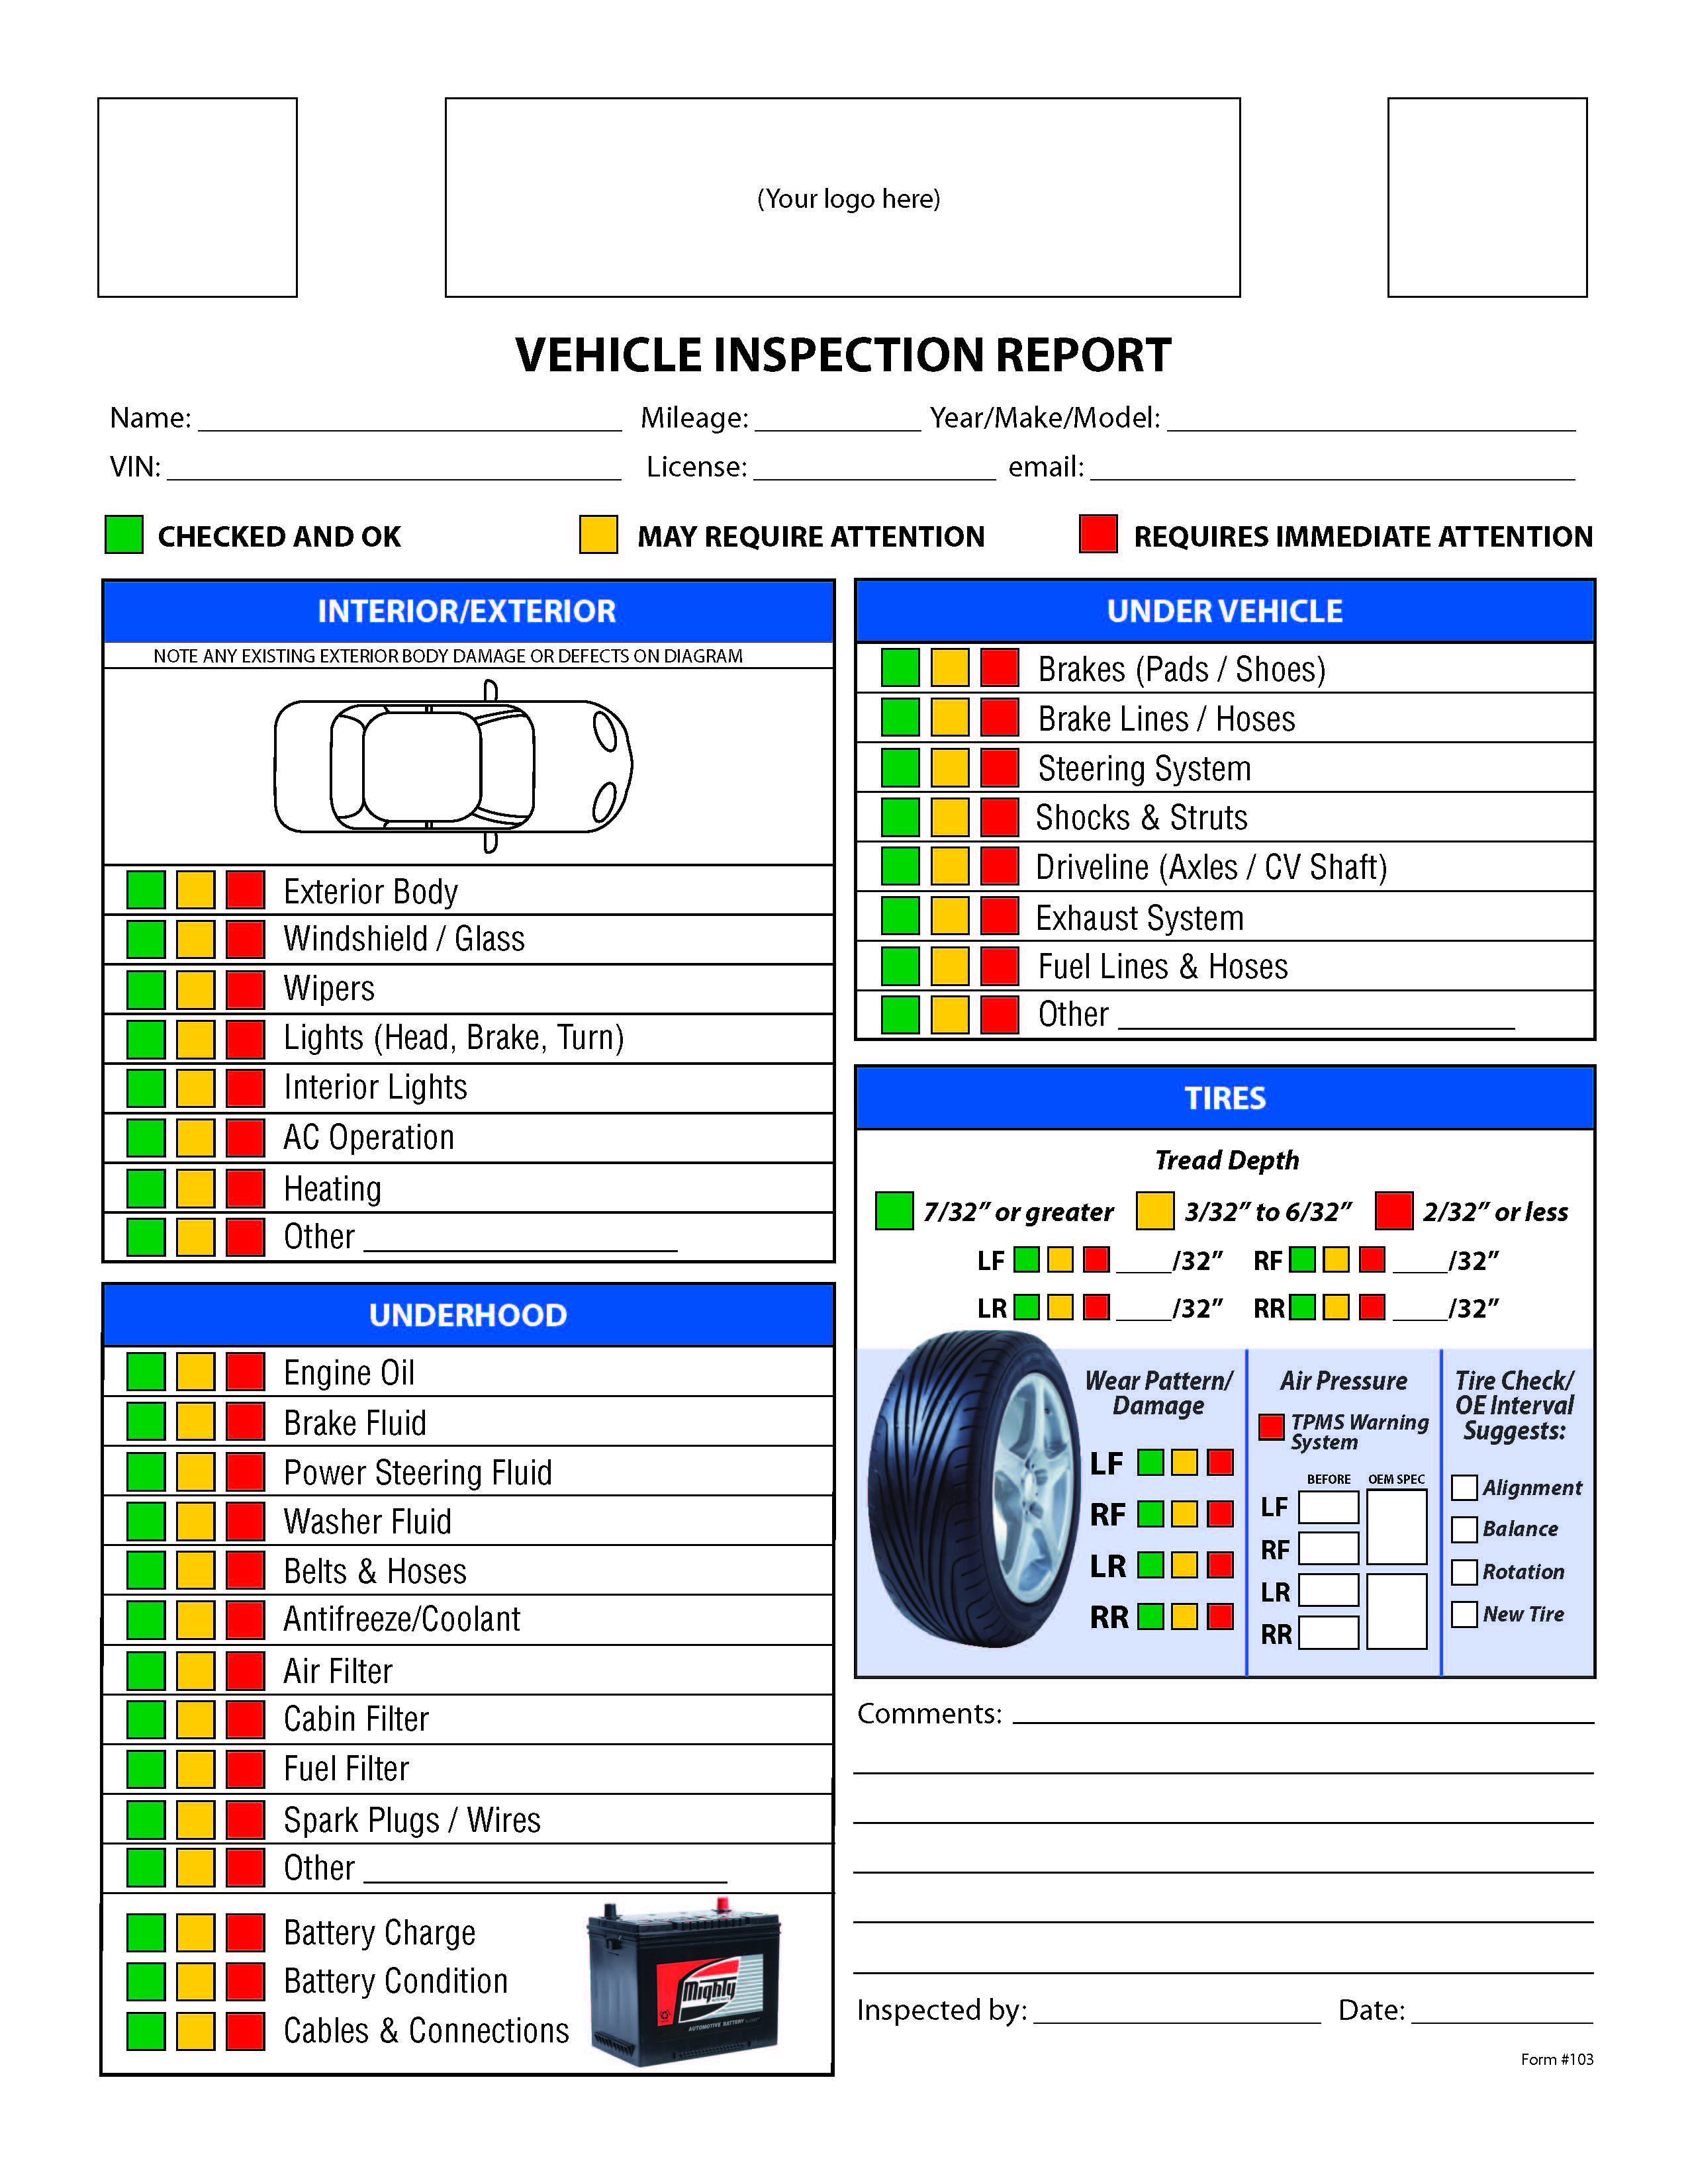 Free Vehicle Inspection Checklist Form | Good To Know Inside Vehicle Inspection Report Template